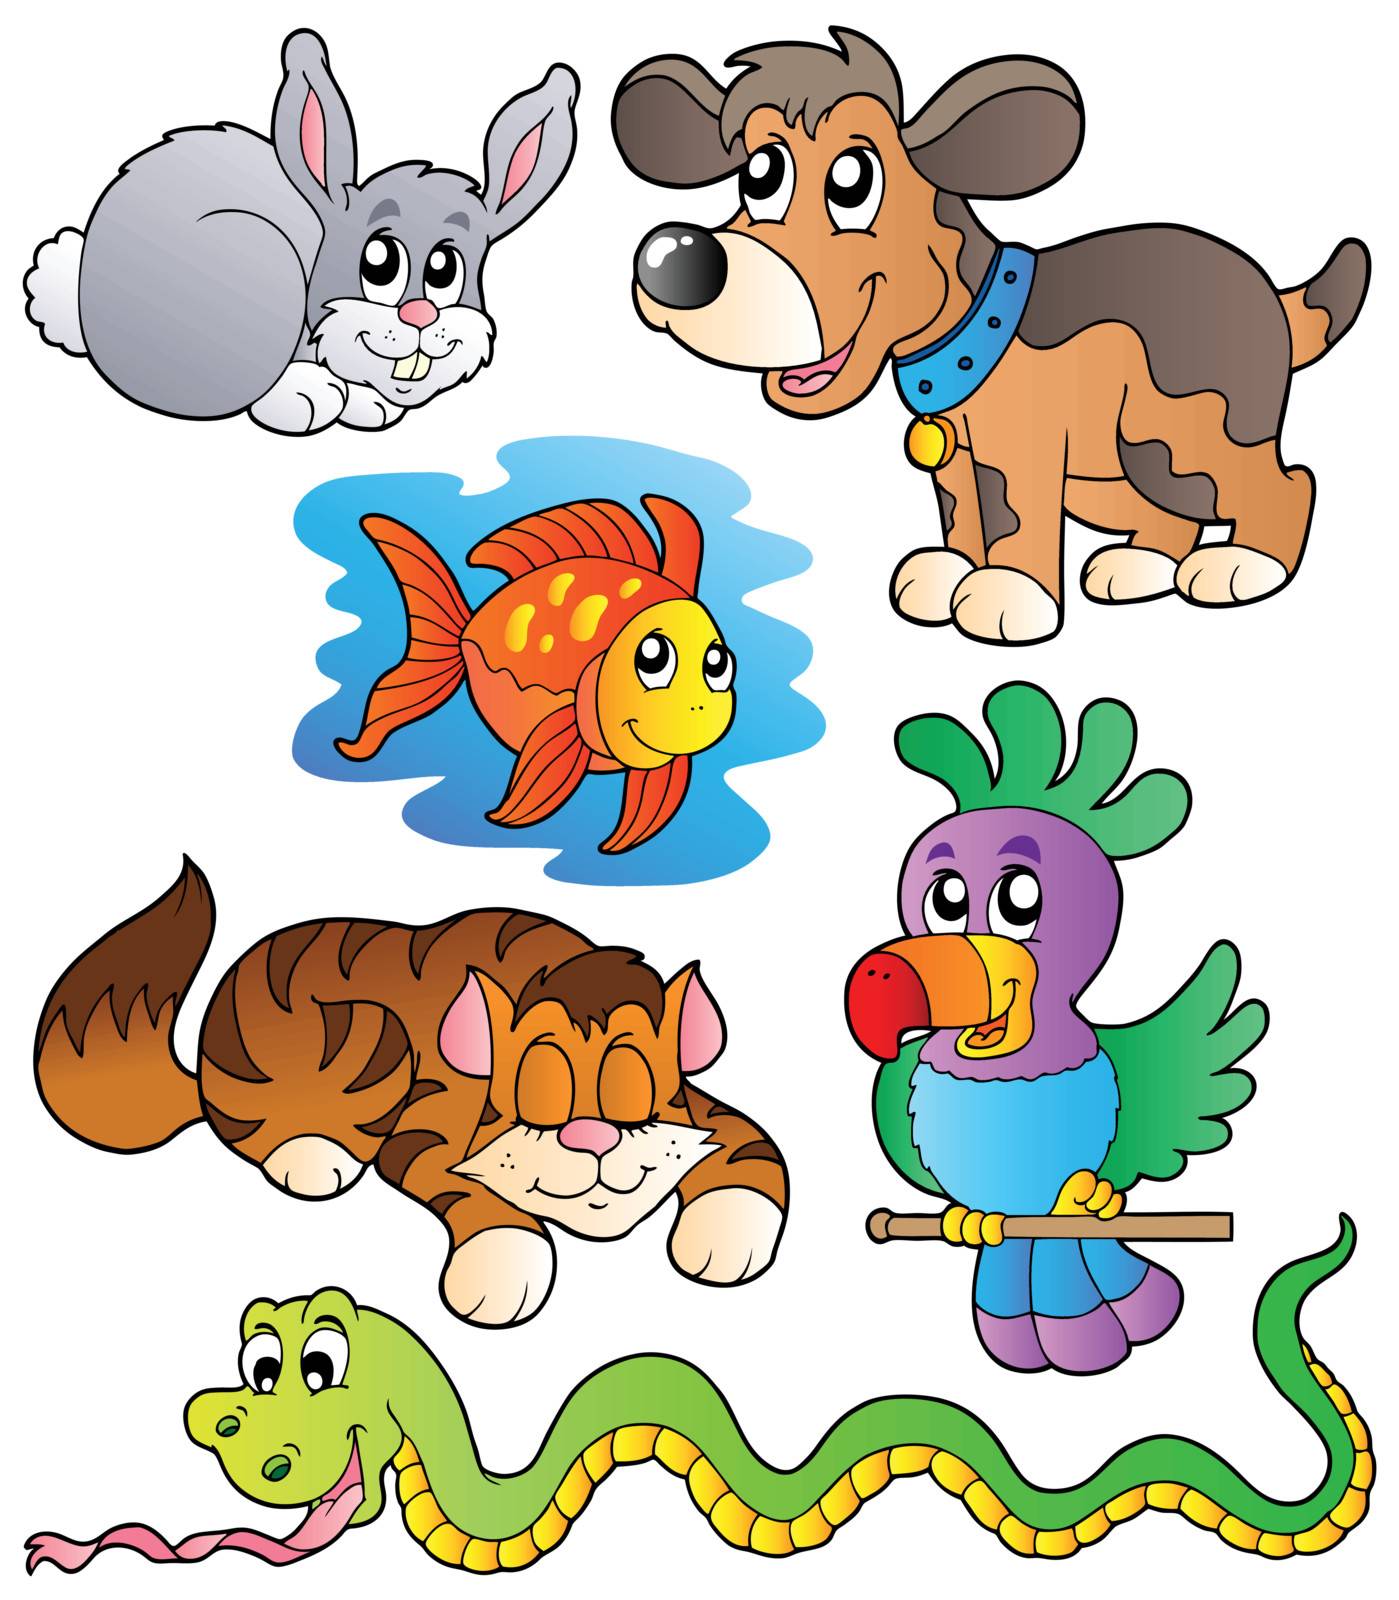 Happy pets collection 1 - vector illustration.